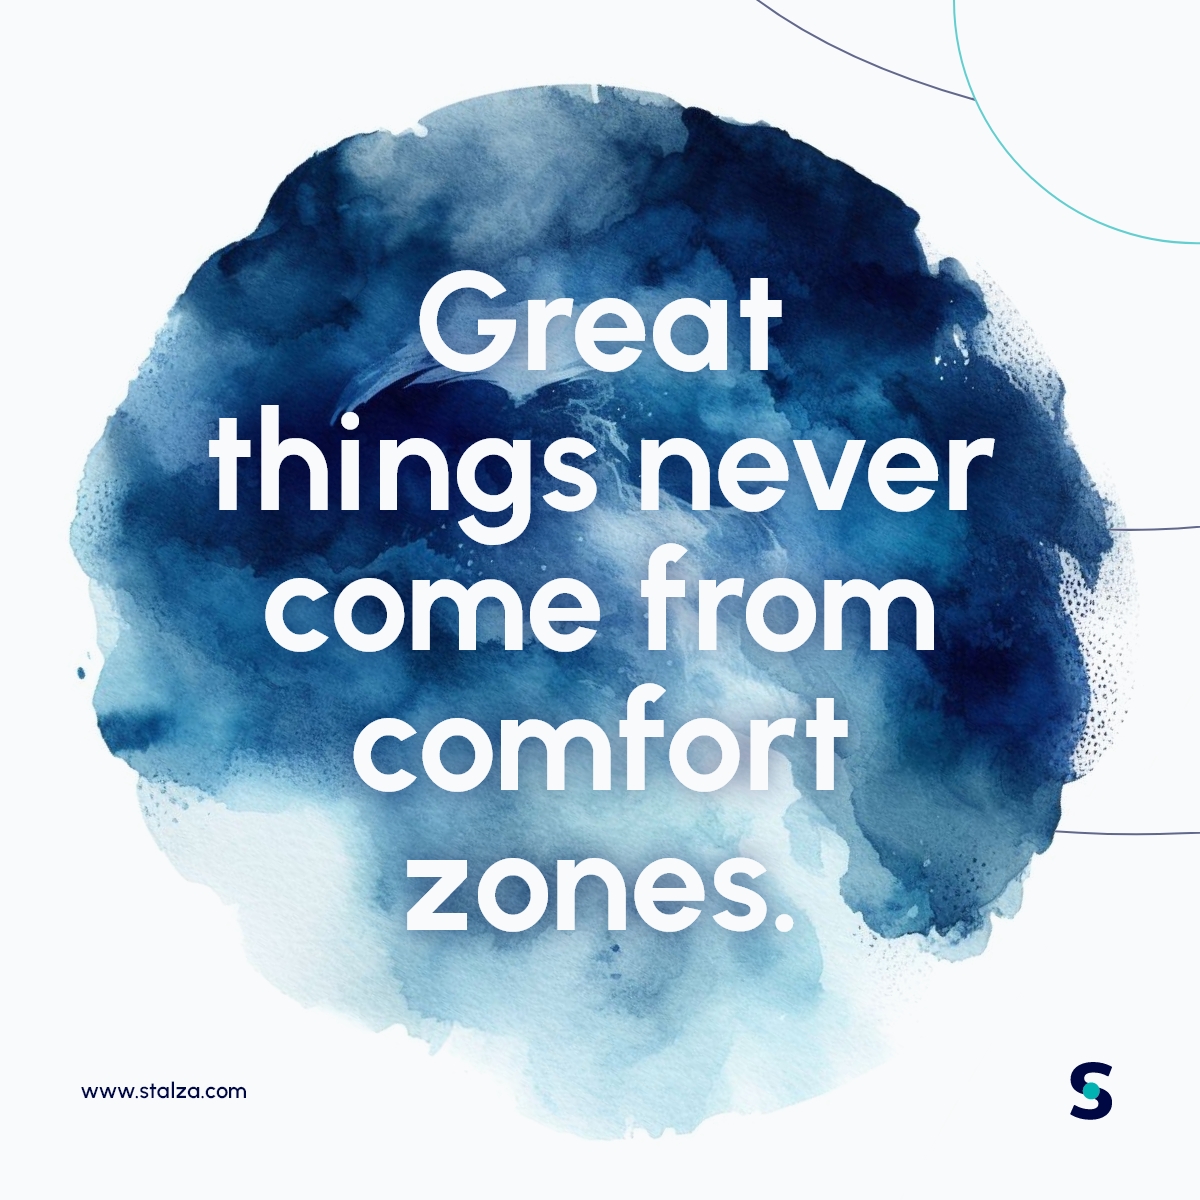 Let these words ignite your journey toward new heights and endless possibilities. Challenge yourself, break barriers, and discover the extraordinary waiting just beyond your comfort zone.

#StepOutside #EmbraceTheChallenge #LimitlessPotential #StalzaTech #Stalza